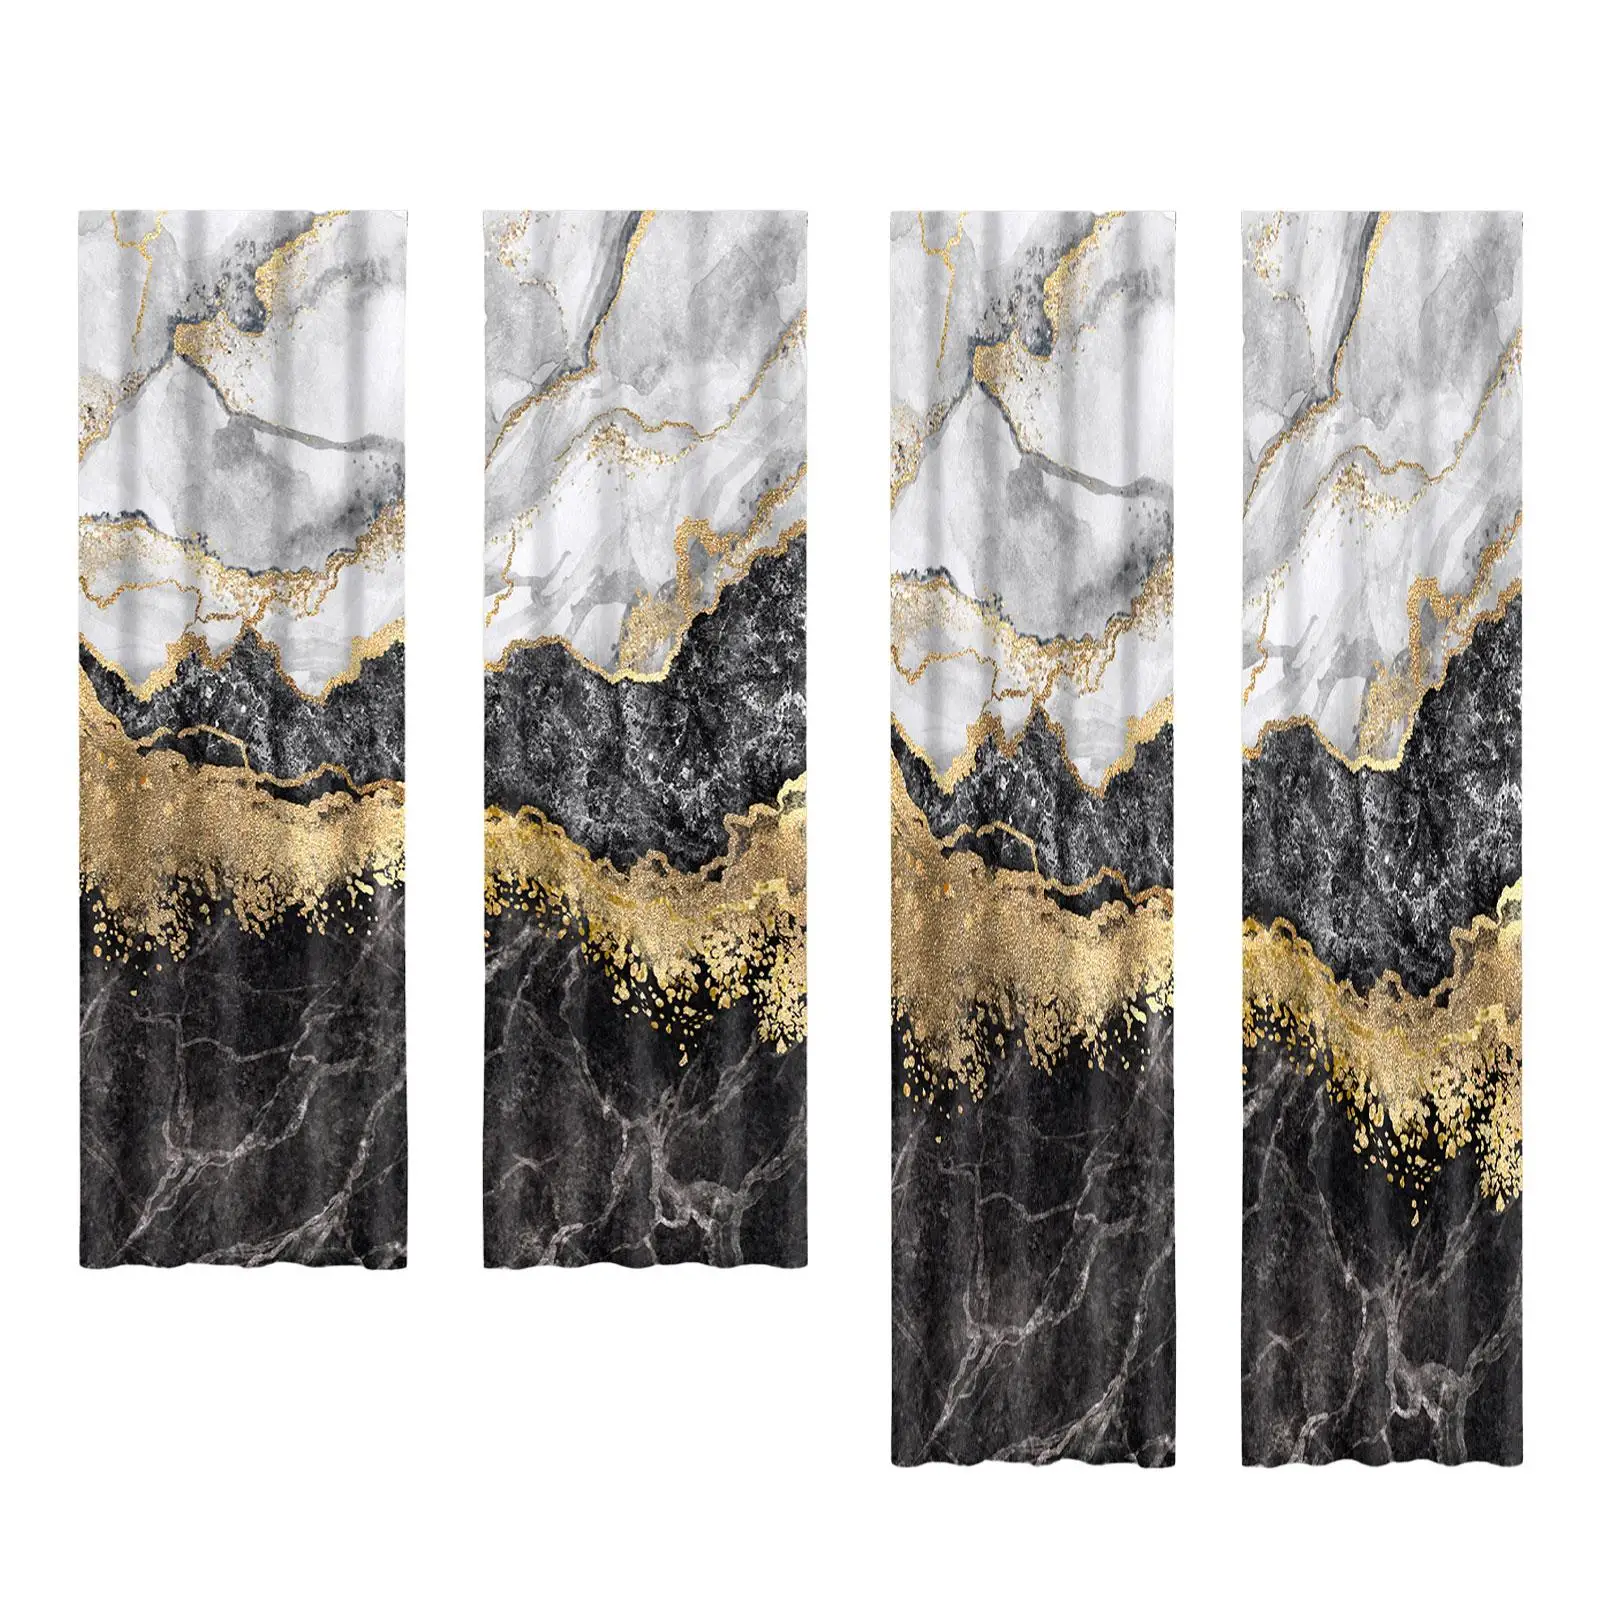 Marble Pattern Digital Print Blackout Curtain Accessories Easily Install and Slide Lightweight Two Panels for Room Decoration